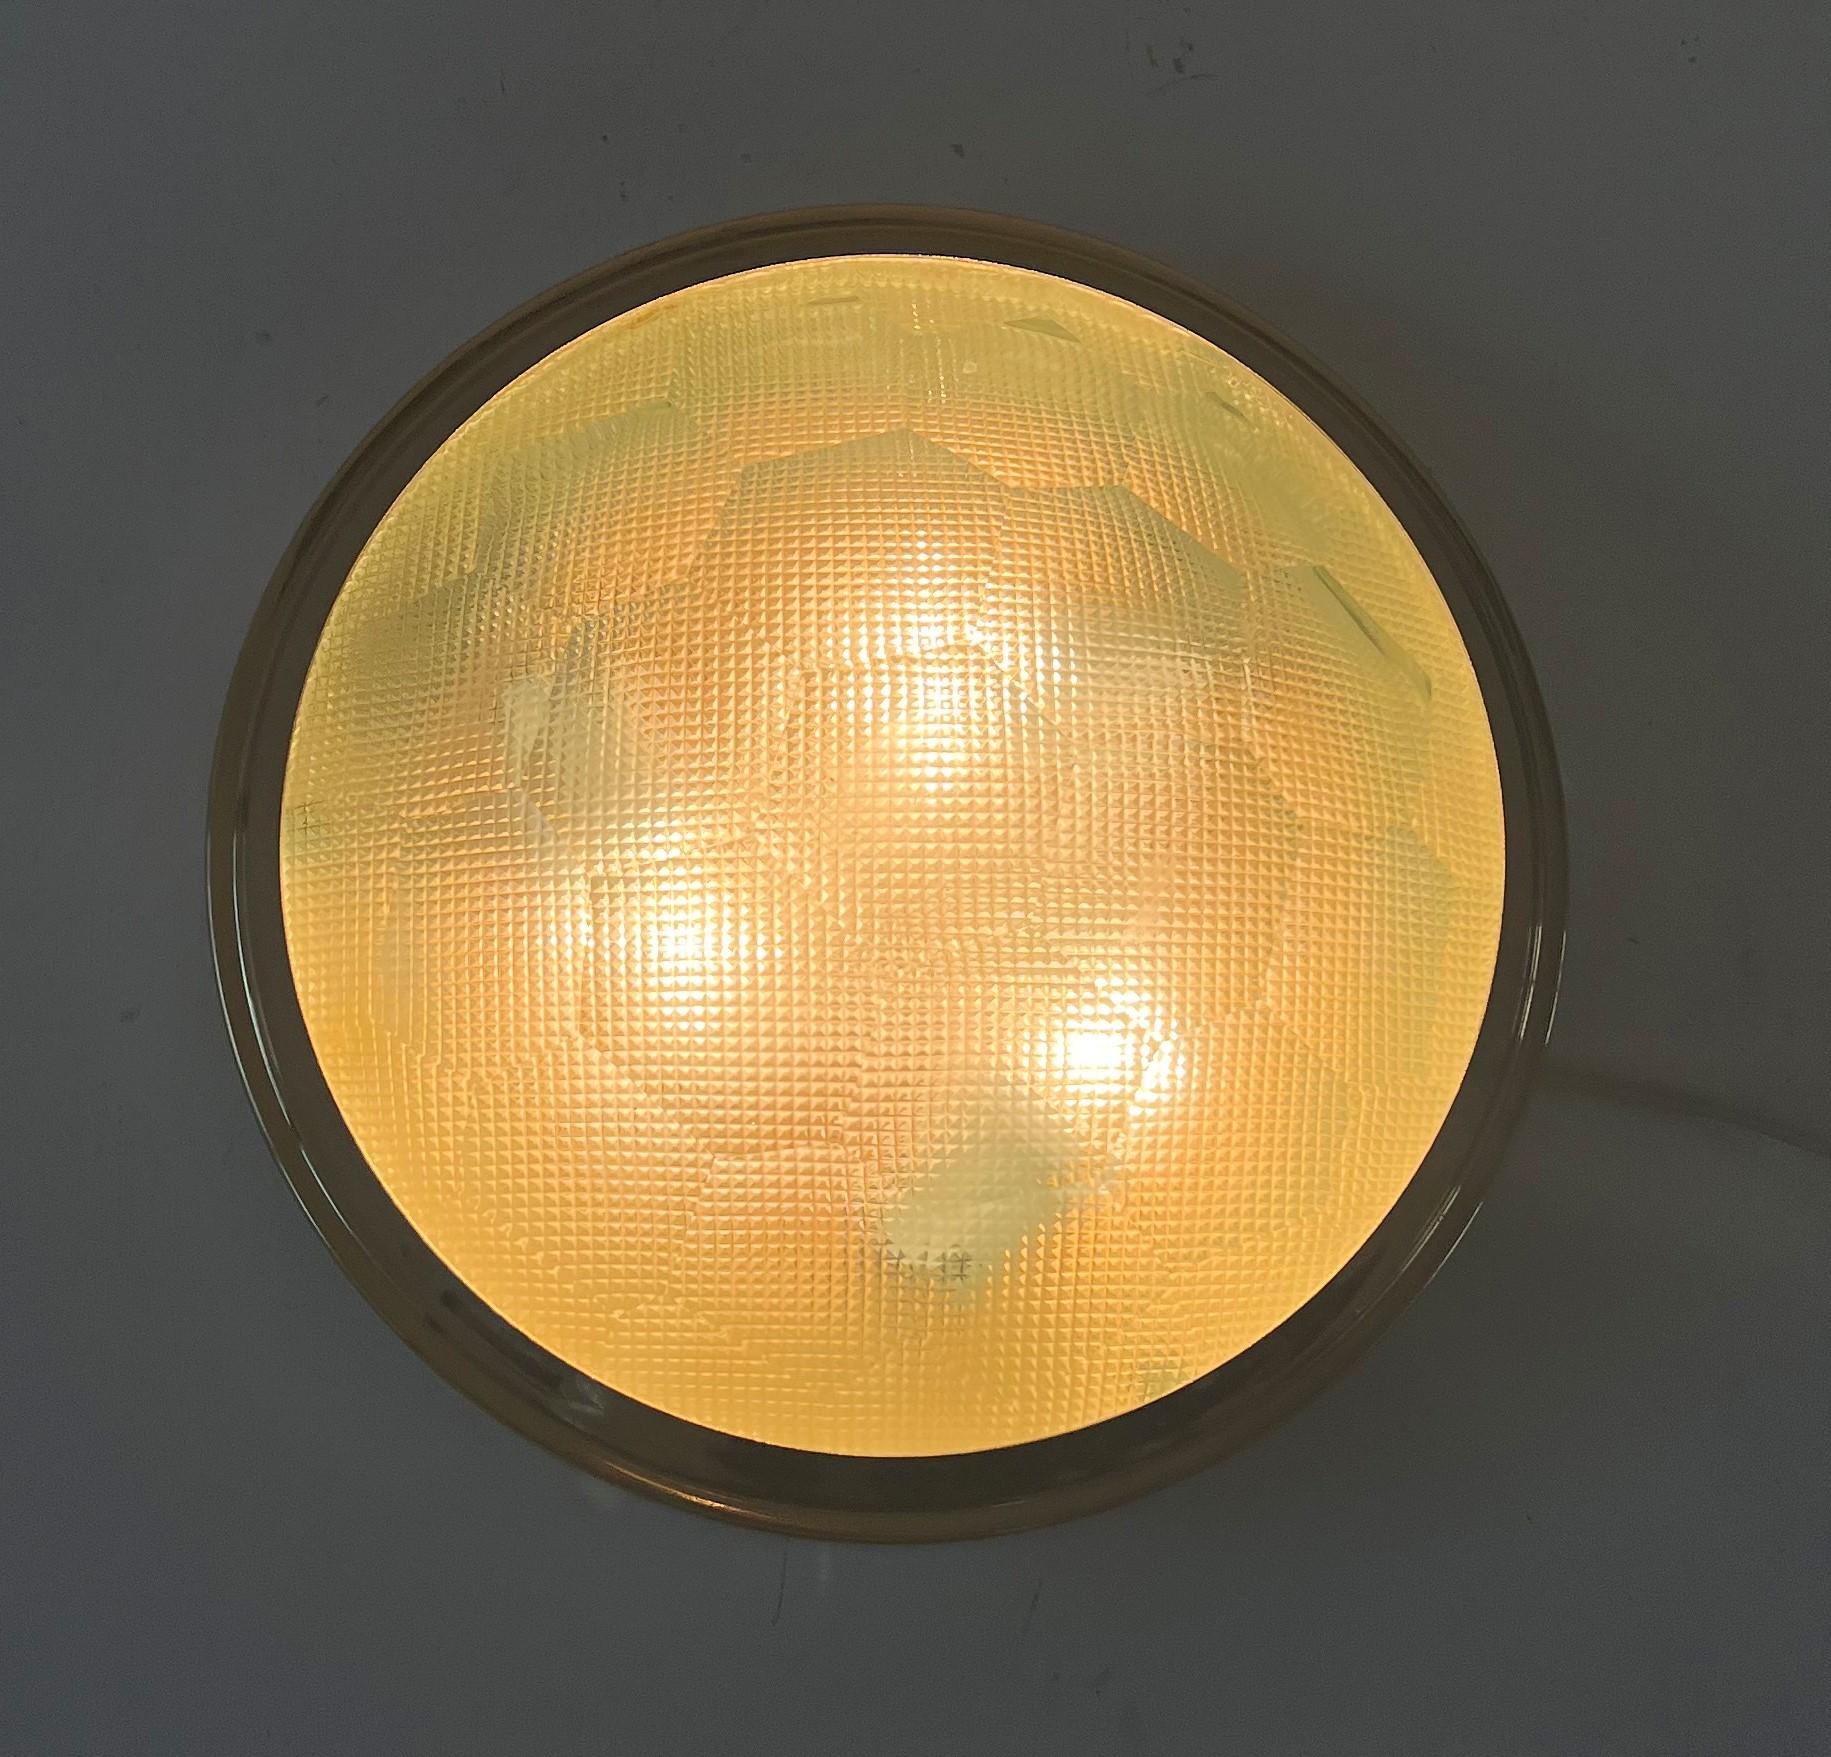 Space age sconce or flush mount, manufactured in italy circa 1960.
the light consists of a golden-chromed frame and 2 crystal lenses, the outer one is faceted and the inner lense is in a quadriculed pressed glass.
Both techniques are characteristic